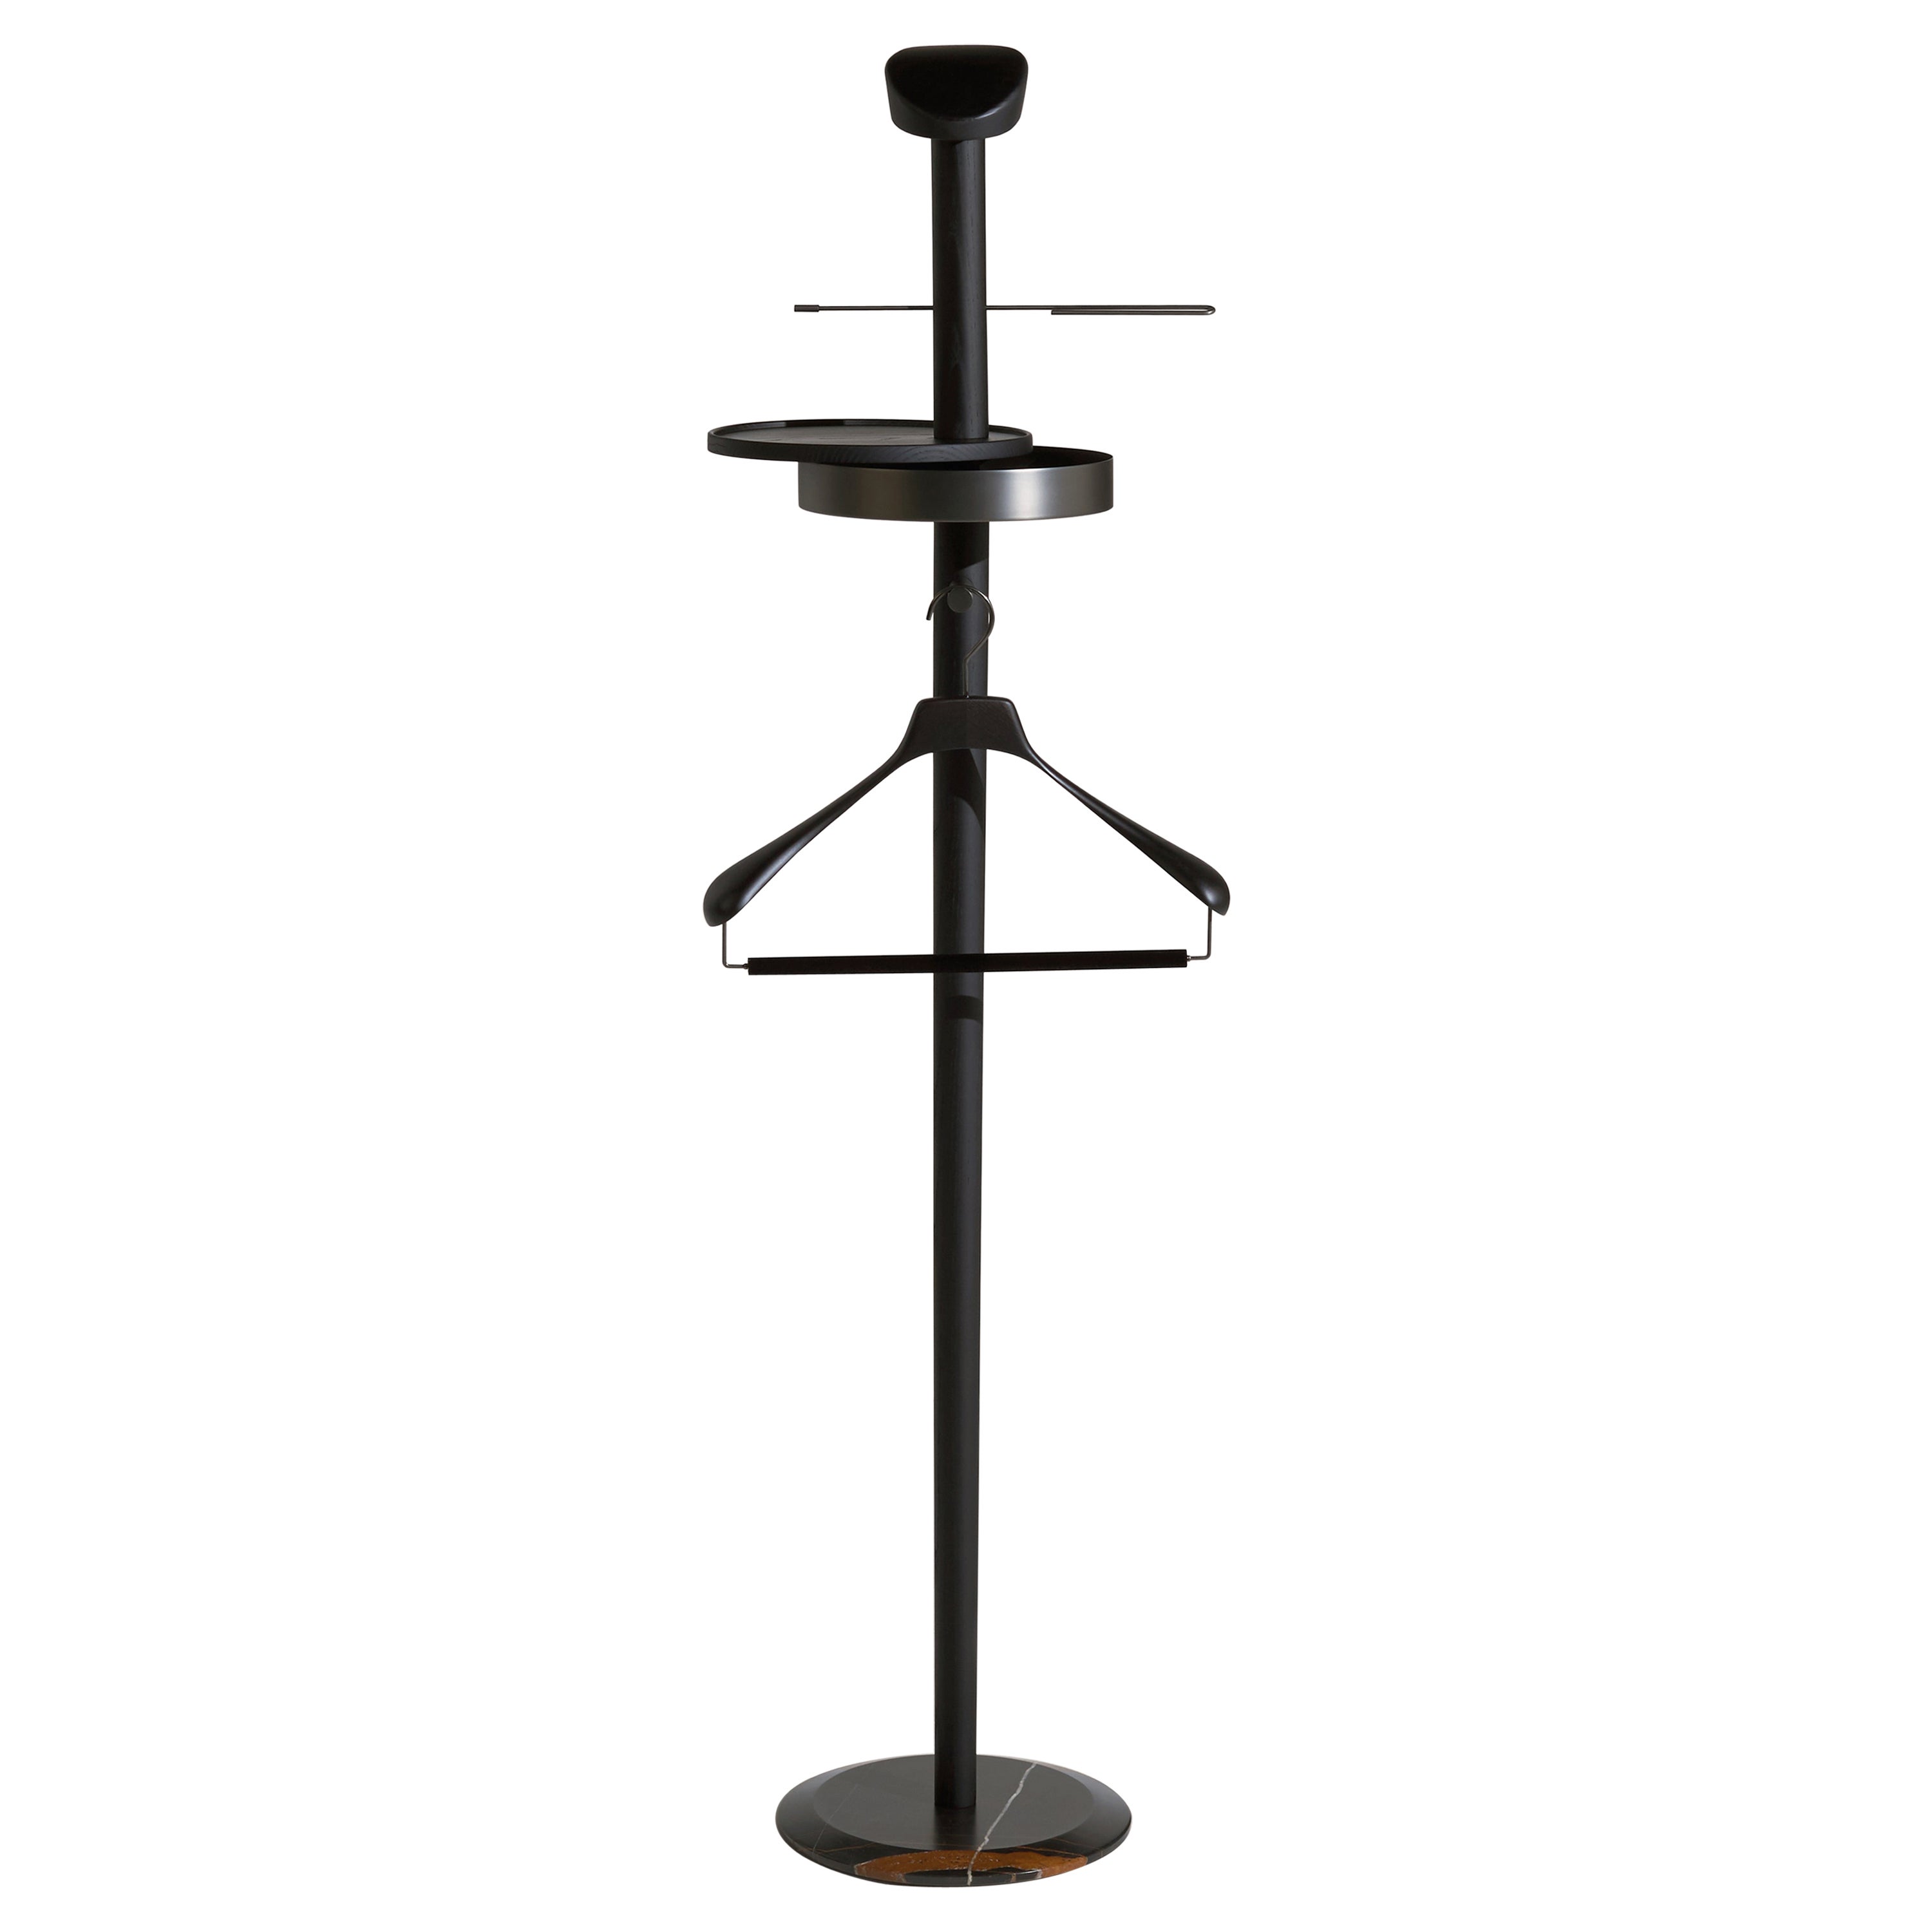 Nomon Valet stand by Andres Martinez For Sale